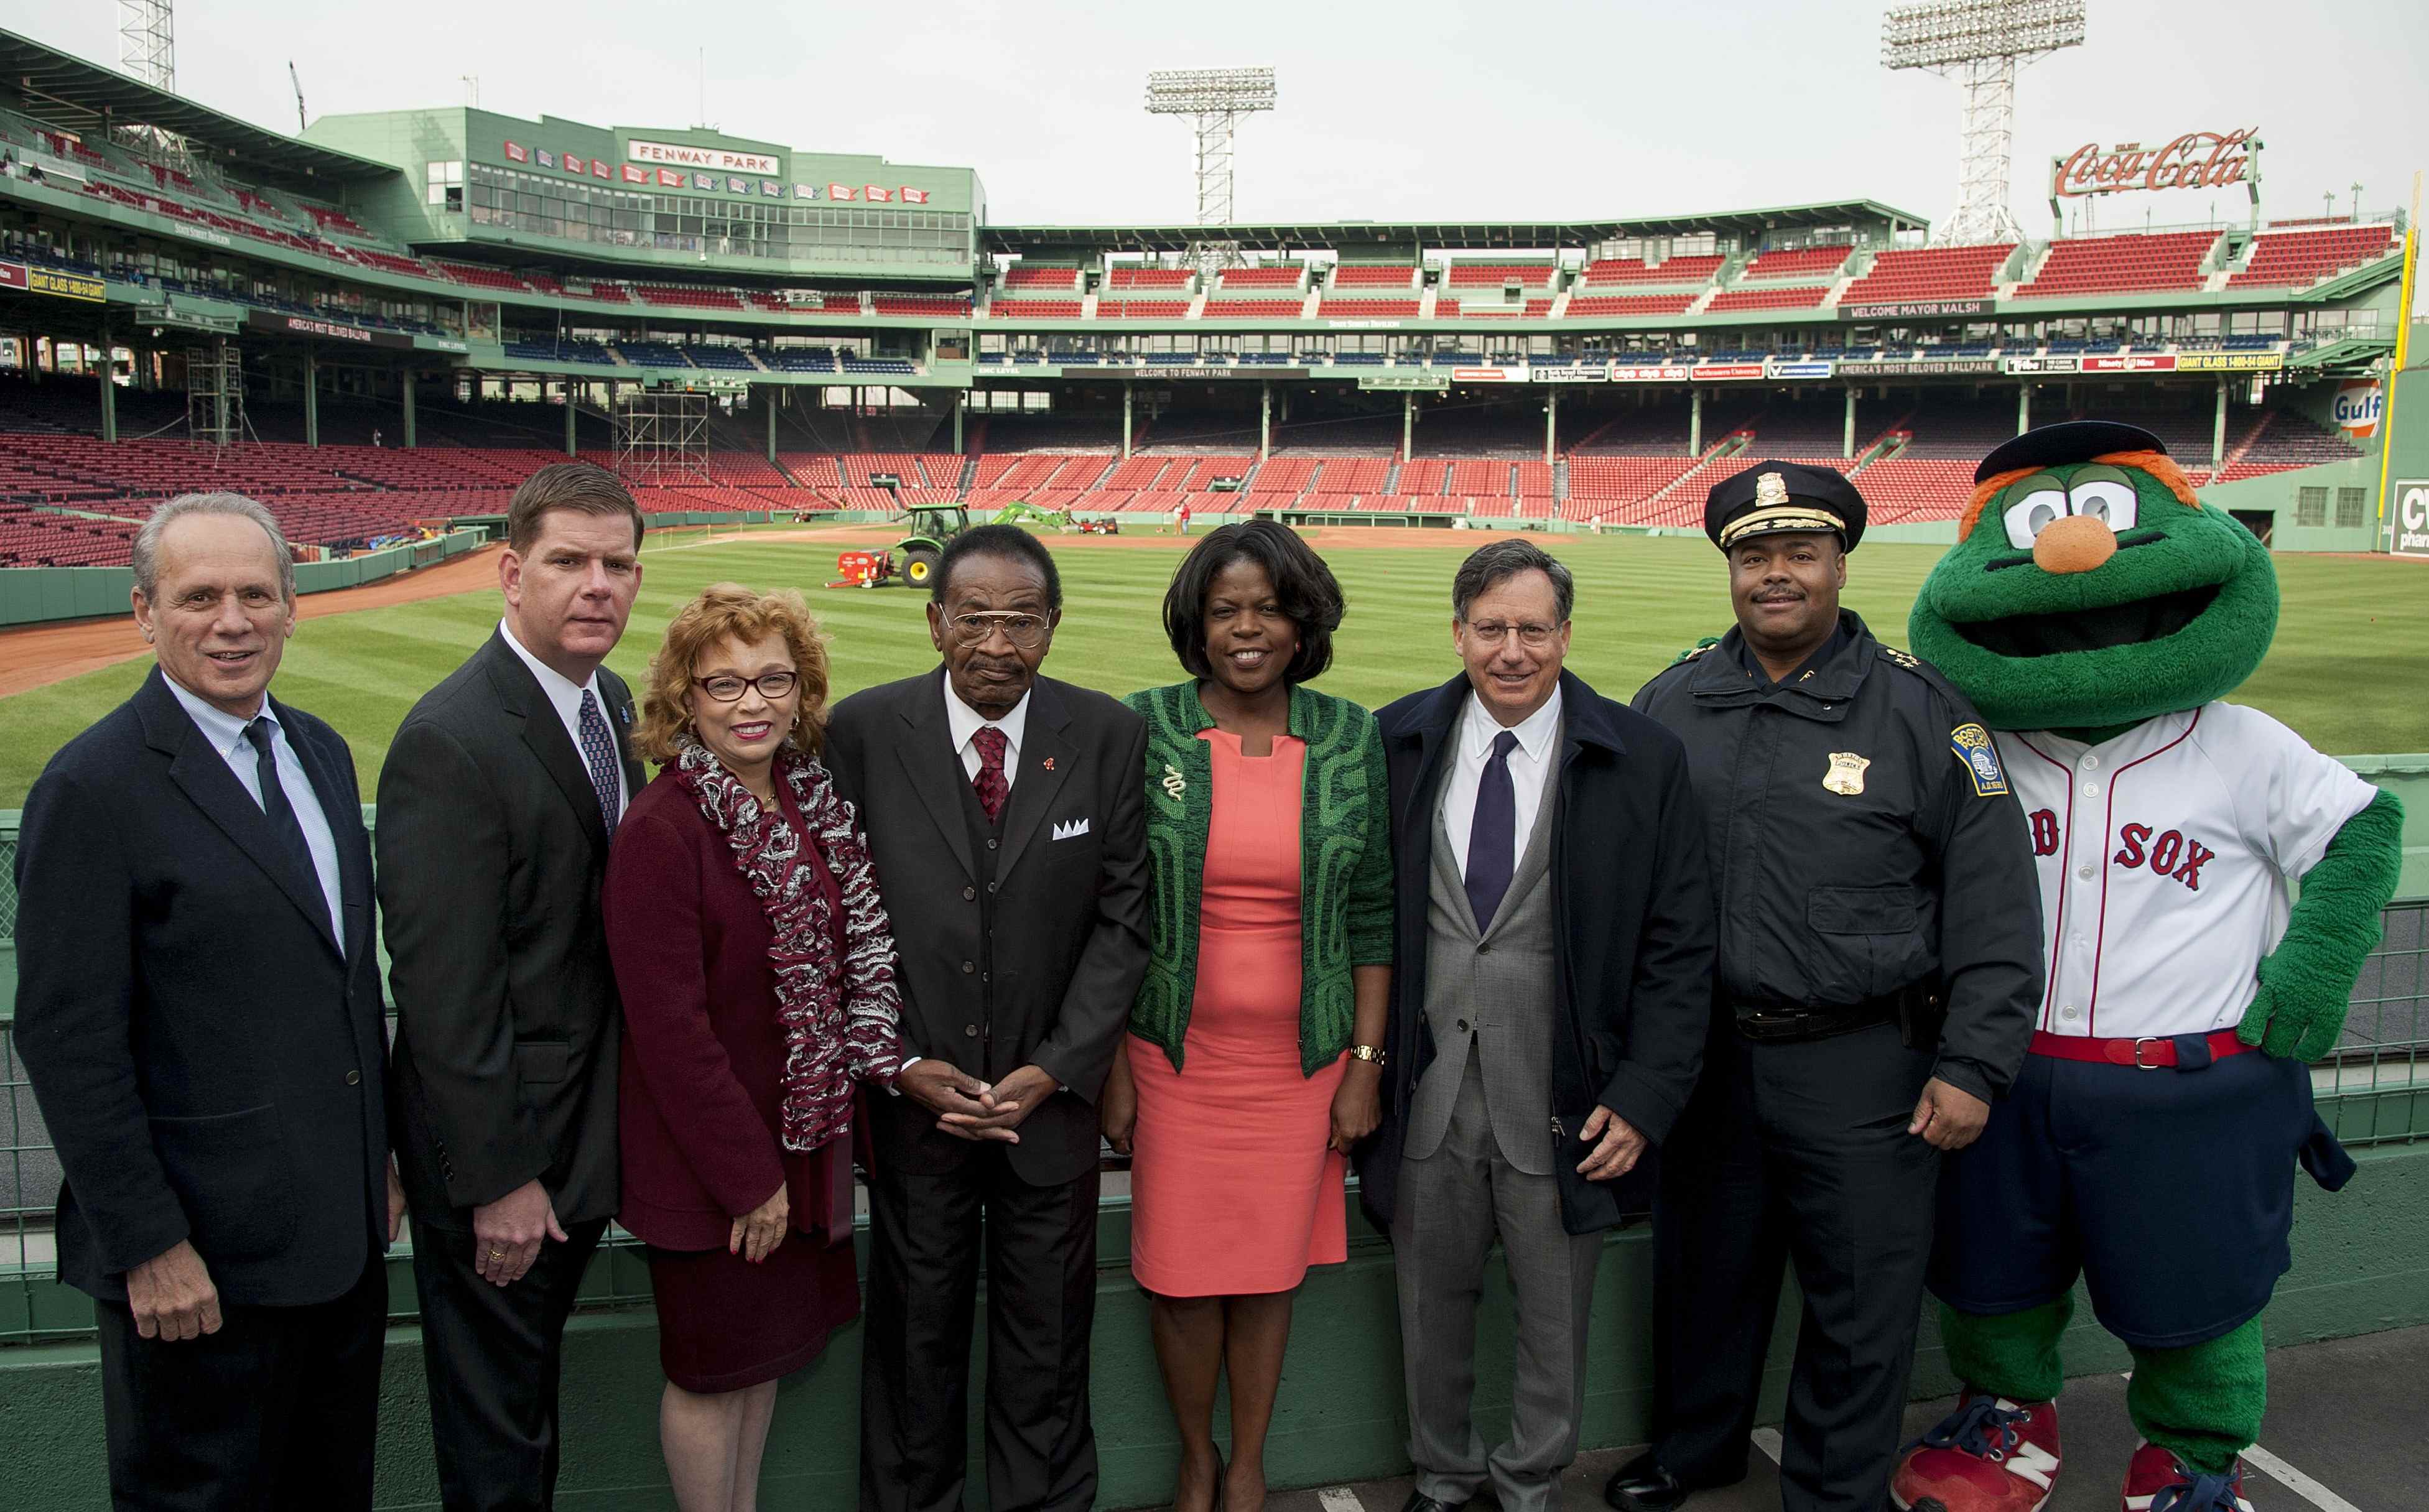 University To Hold Reception At Fenway Park Aug. 29